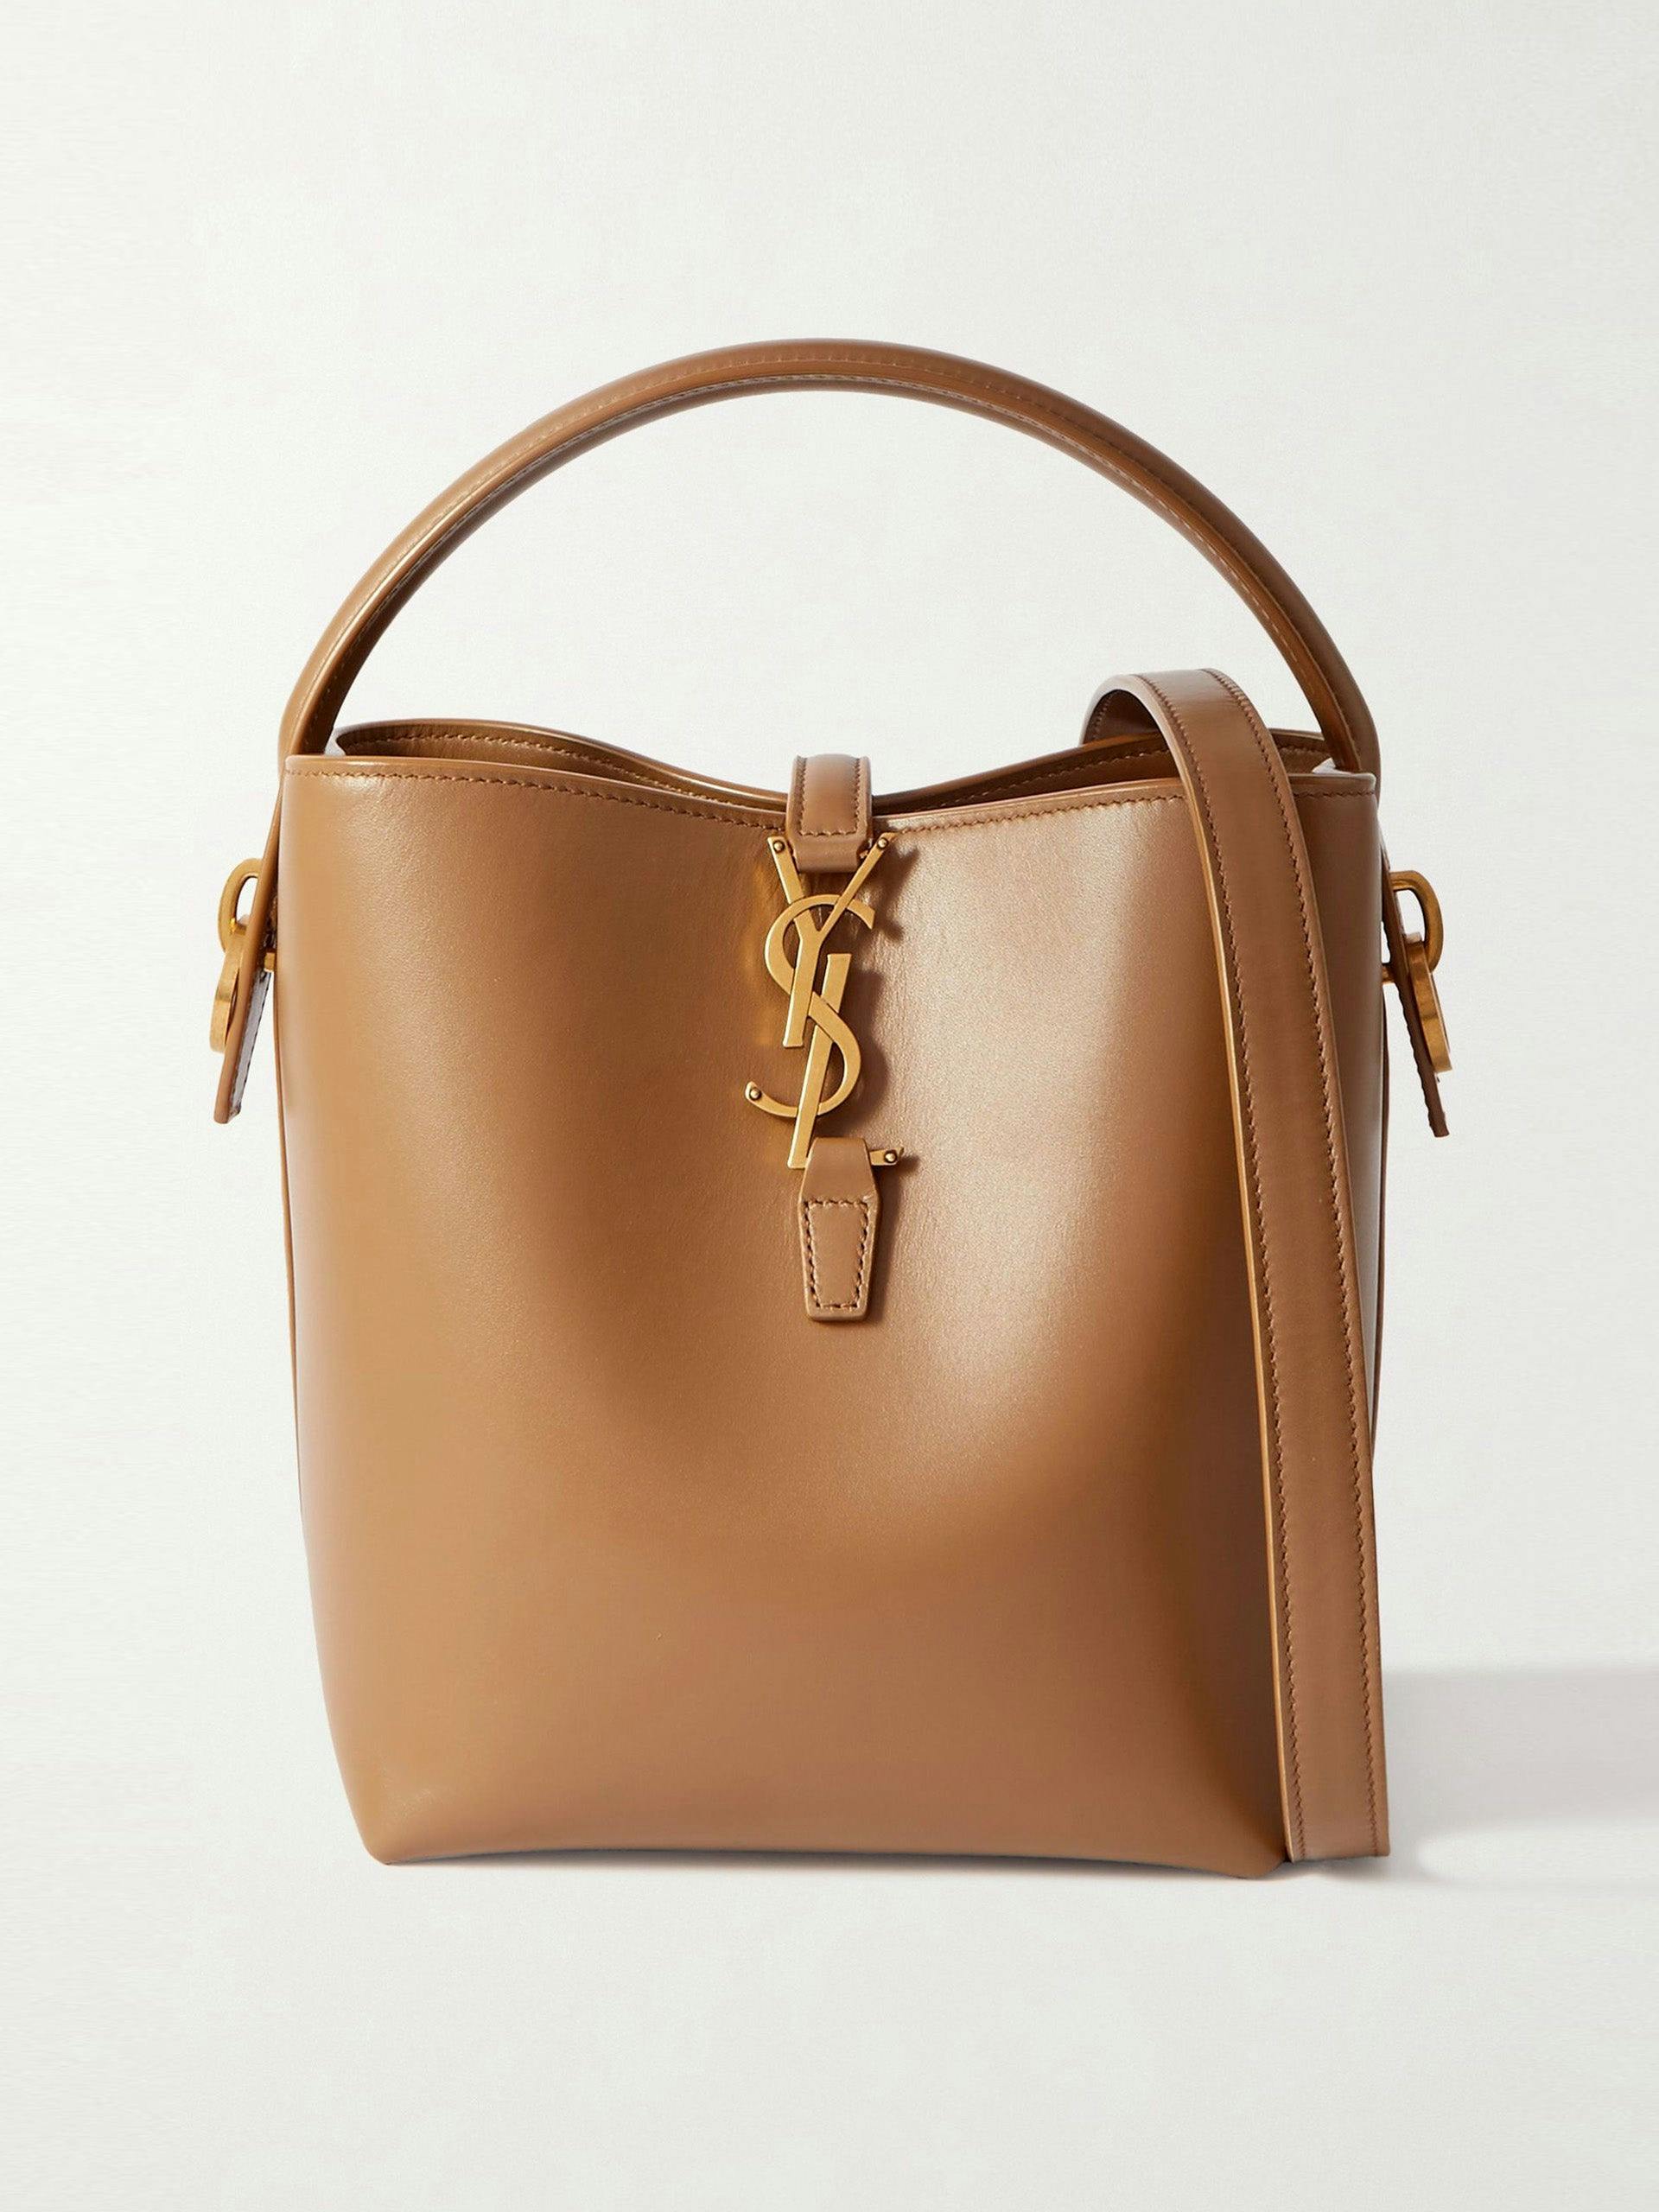 Le 37 small leather bucket bag